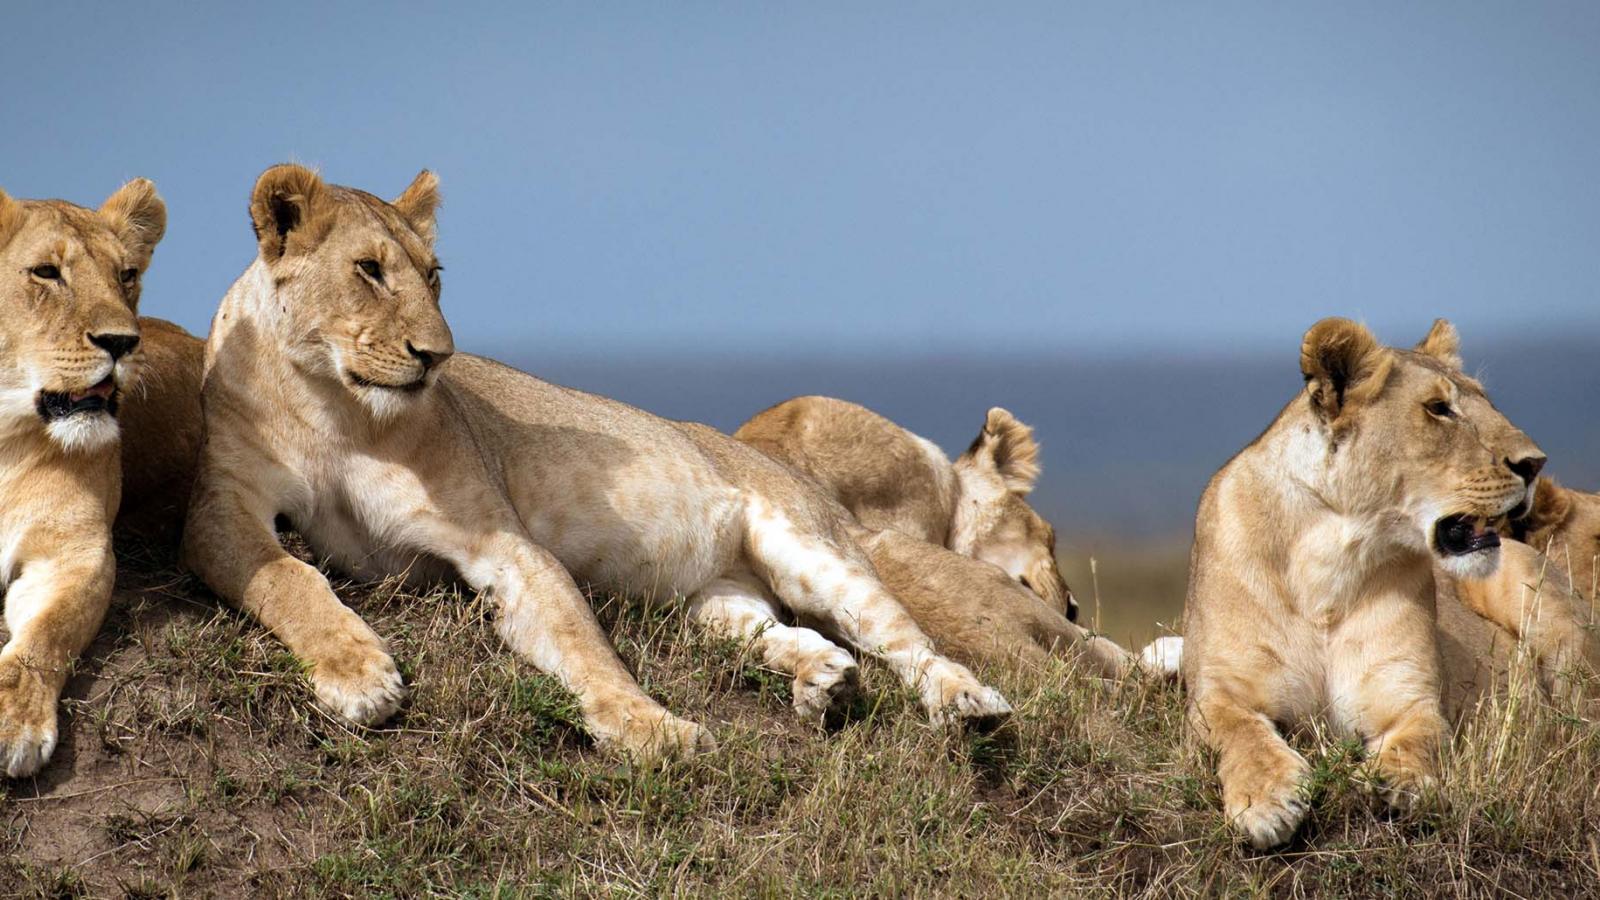 Lions in the Mara: stunning photographs from Sir David Attenborough's Dynasties